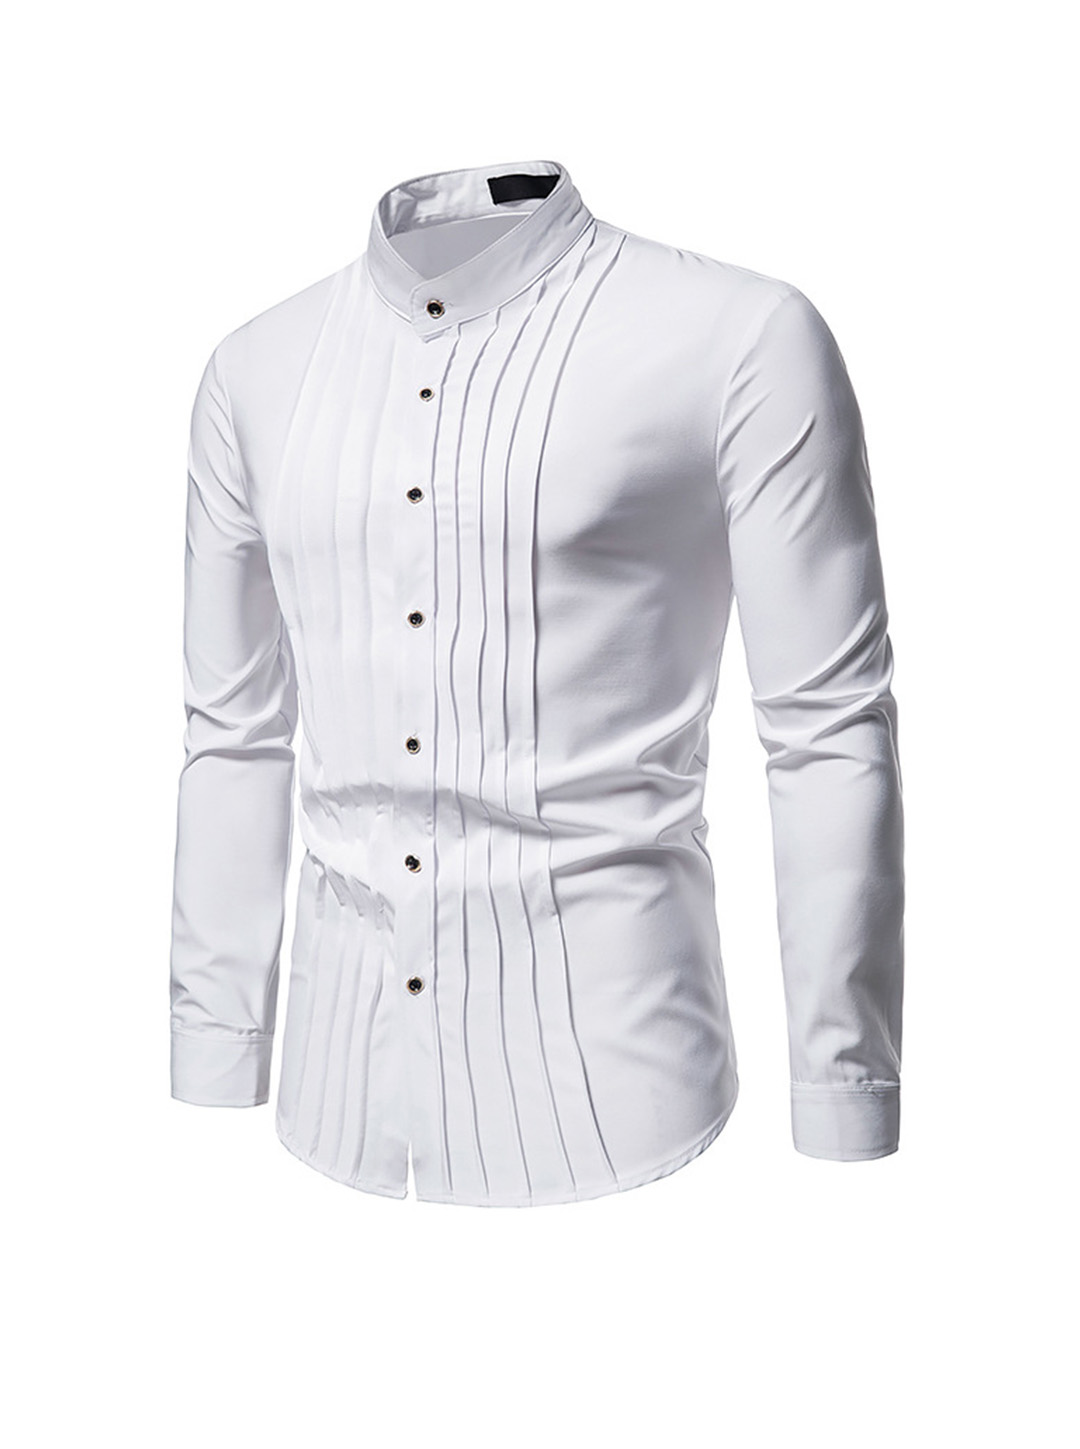 Men's Chance Business Pleated Stand Collar Shirt-poisonstreetwear.com